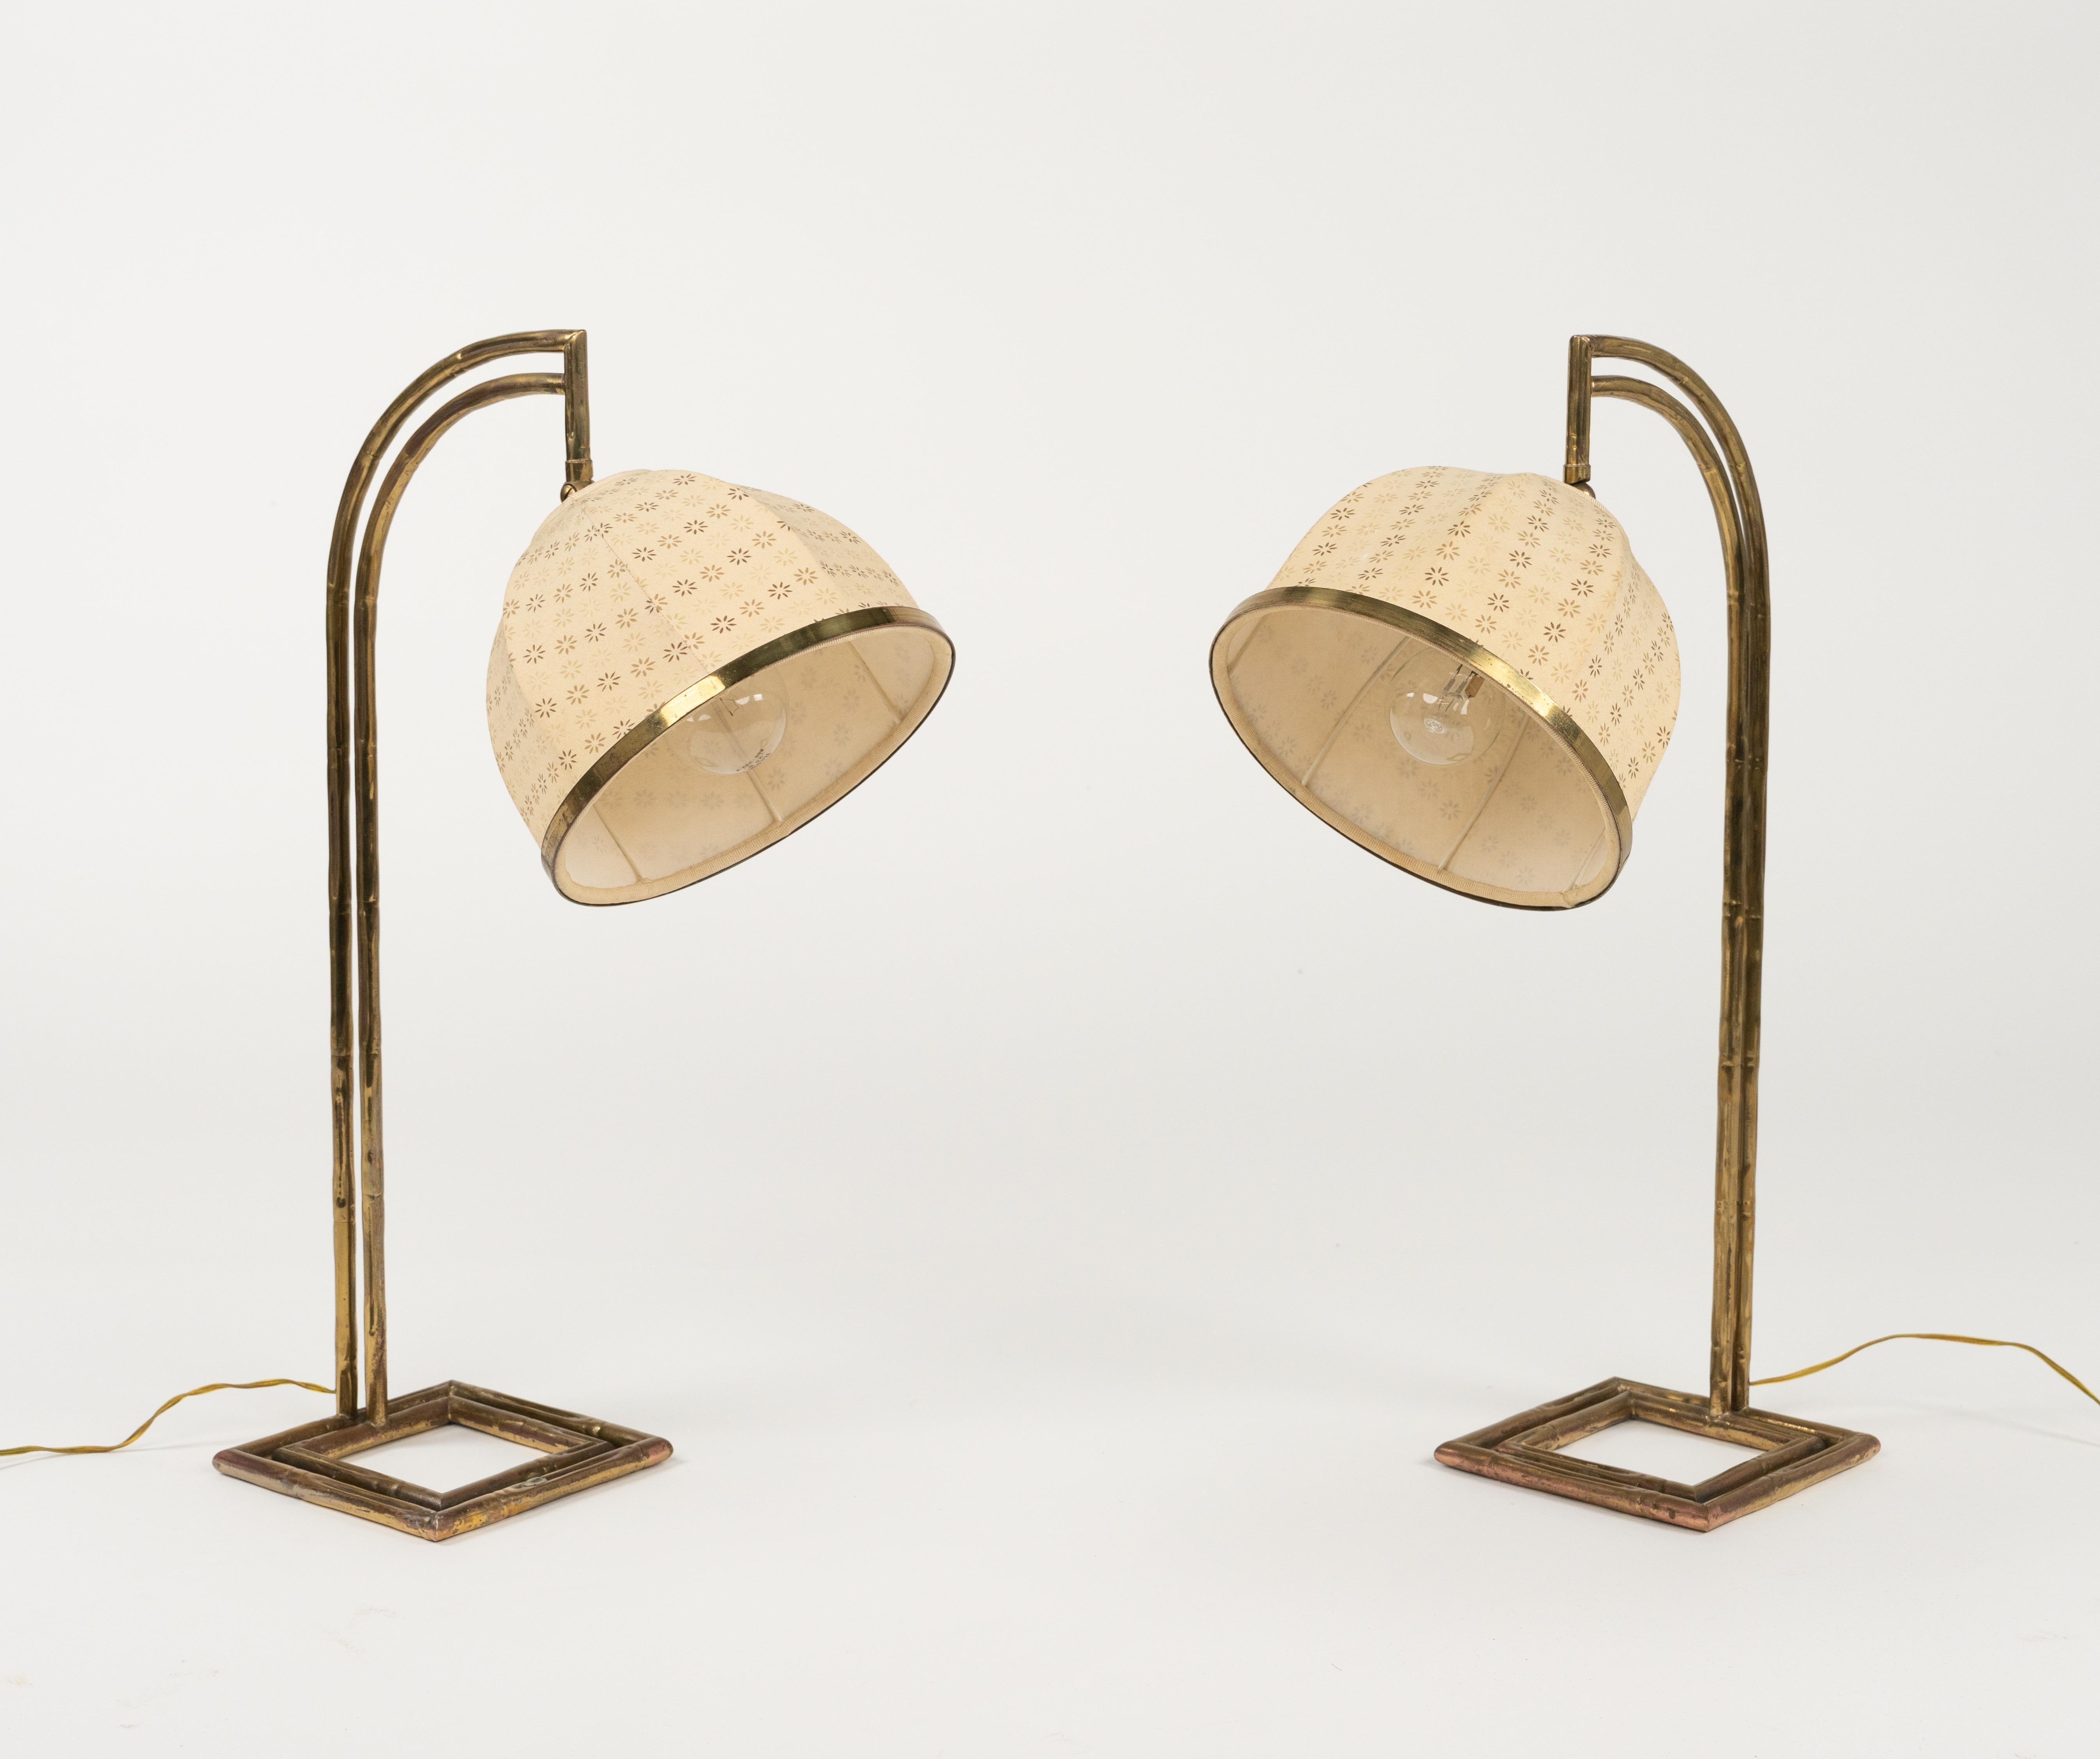 Maison Baguès Pair of Table Lamps in Brass Faux Bamboo and Fabric, Italy 1960s For Sale 8